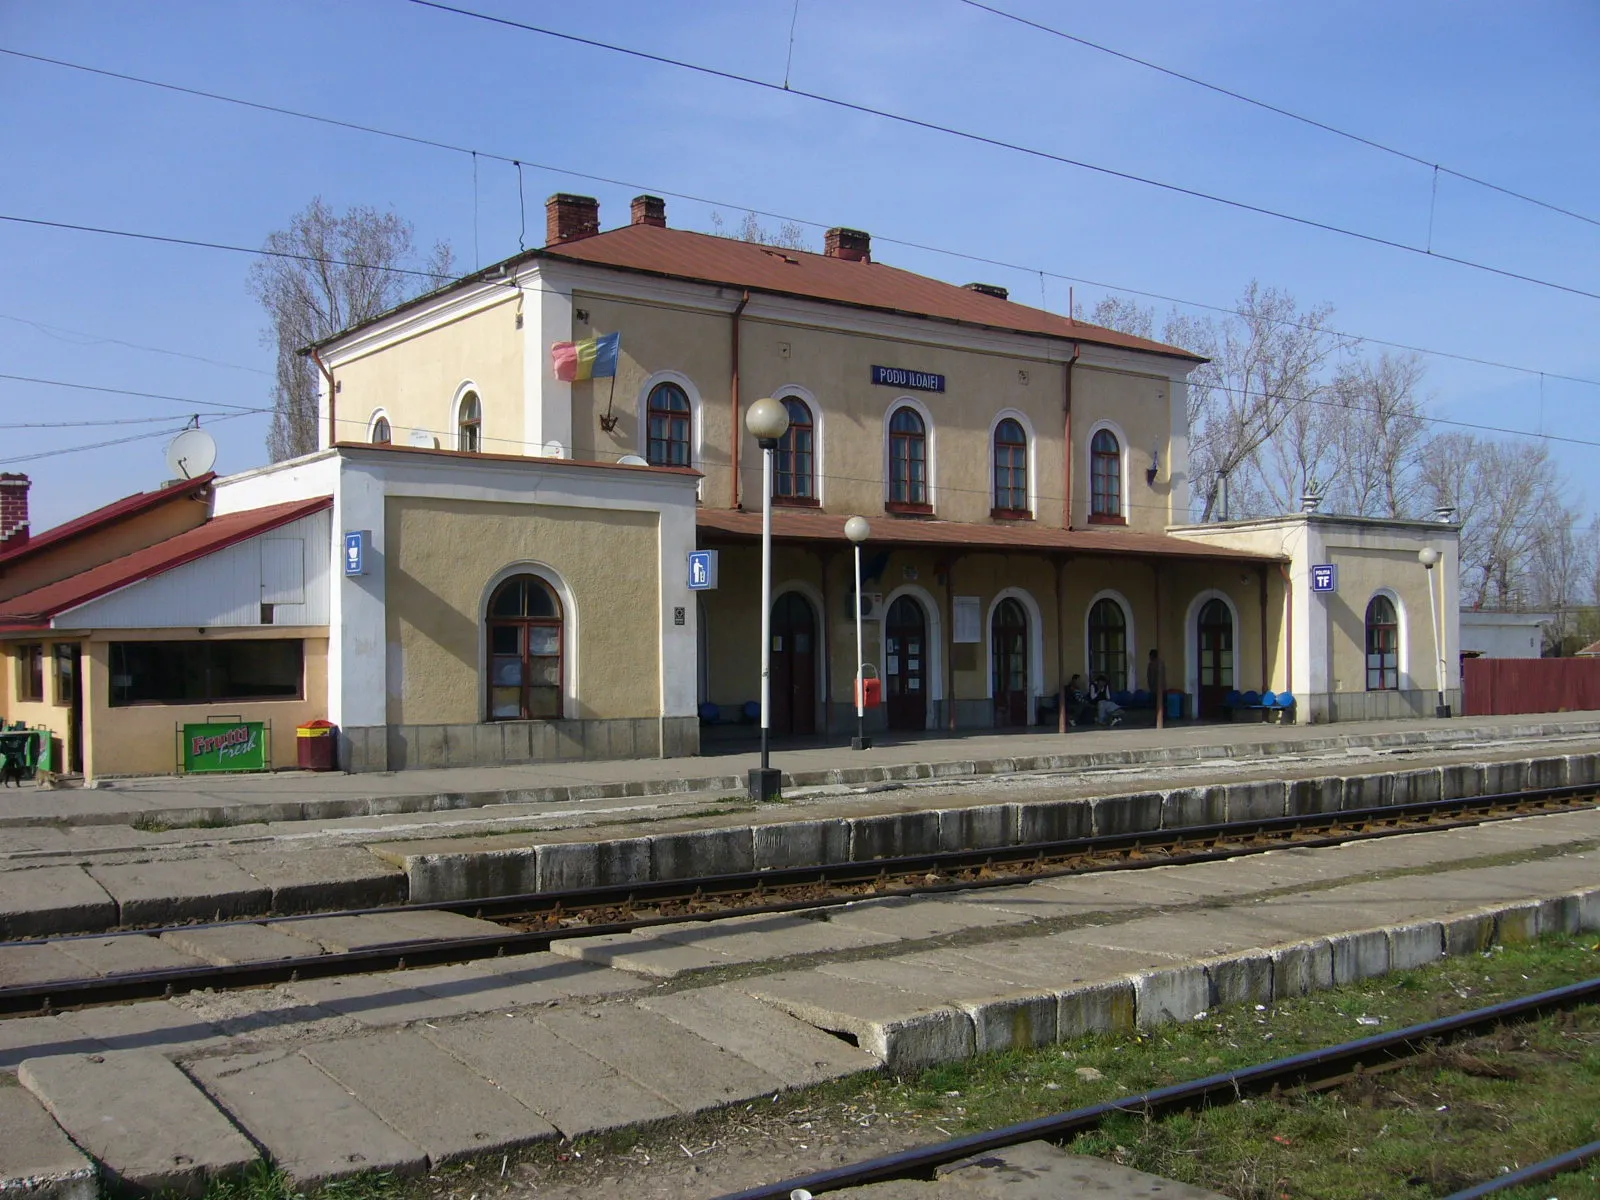 Photo showing: Podu Iloaiei Railway Station, built at the end of the XIX century